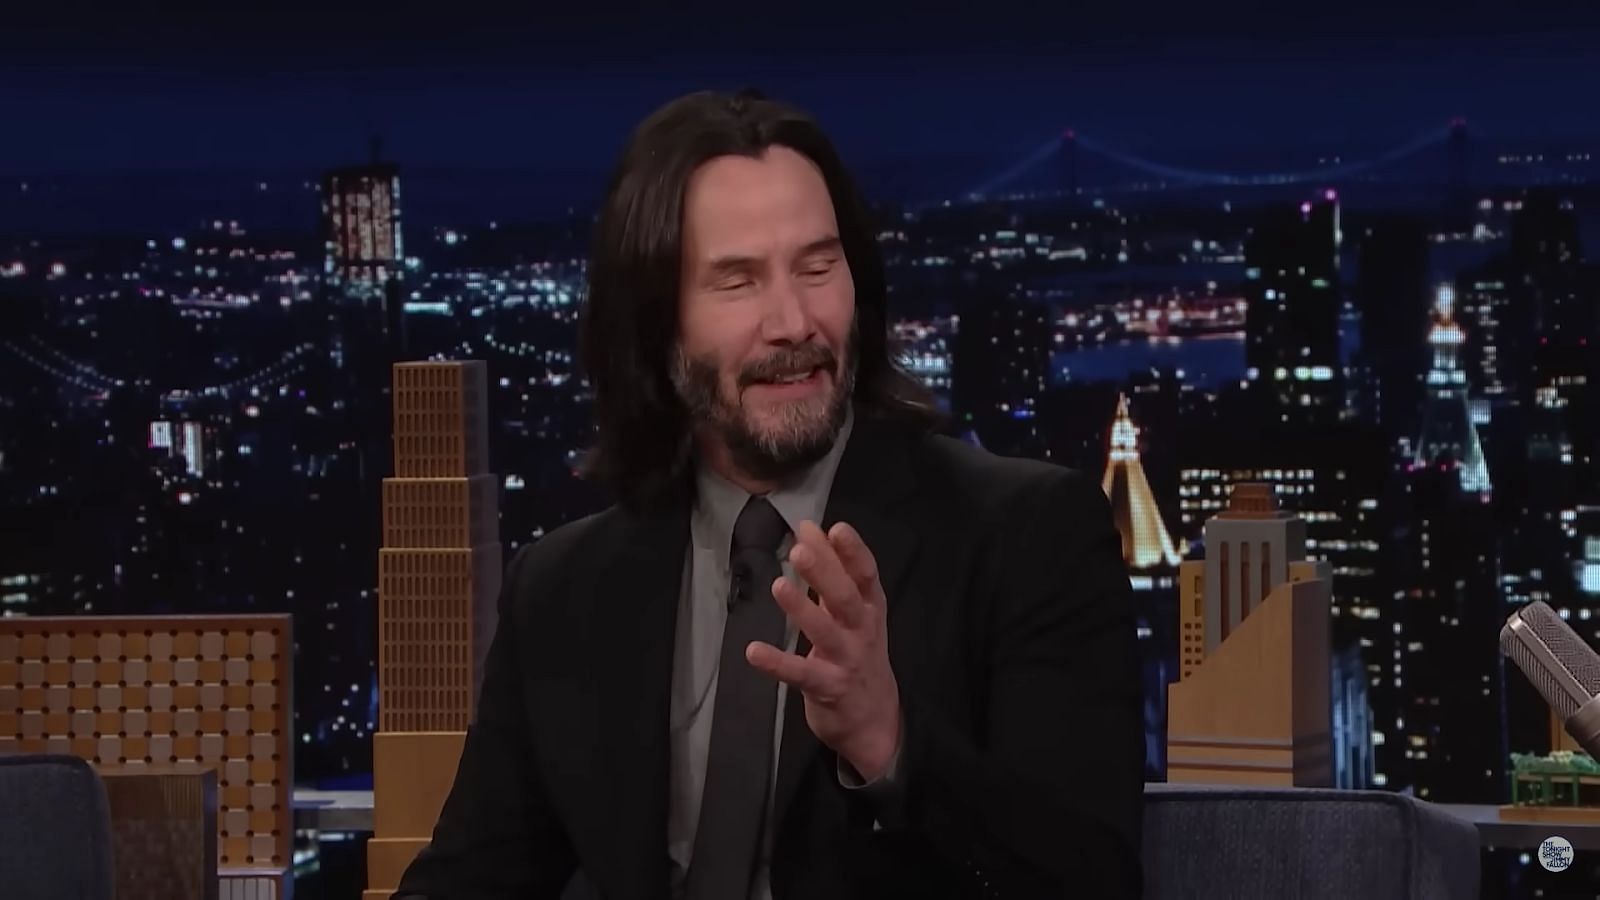 What Ethnicity is Keanu Reeves?